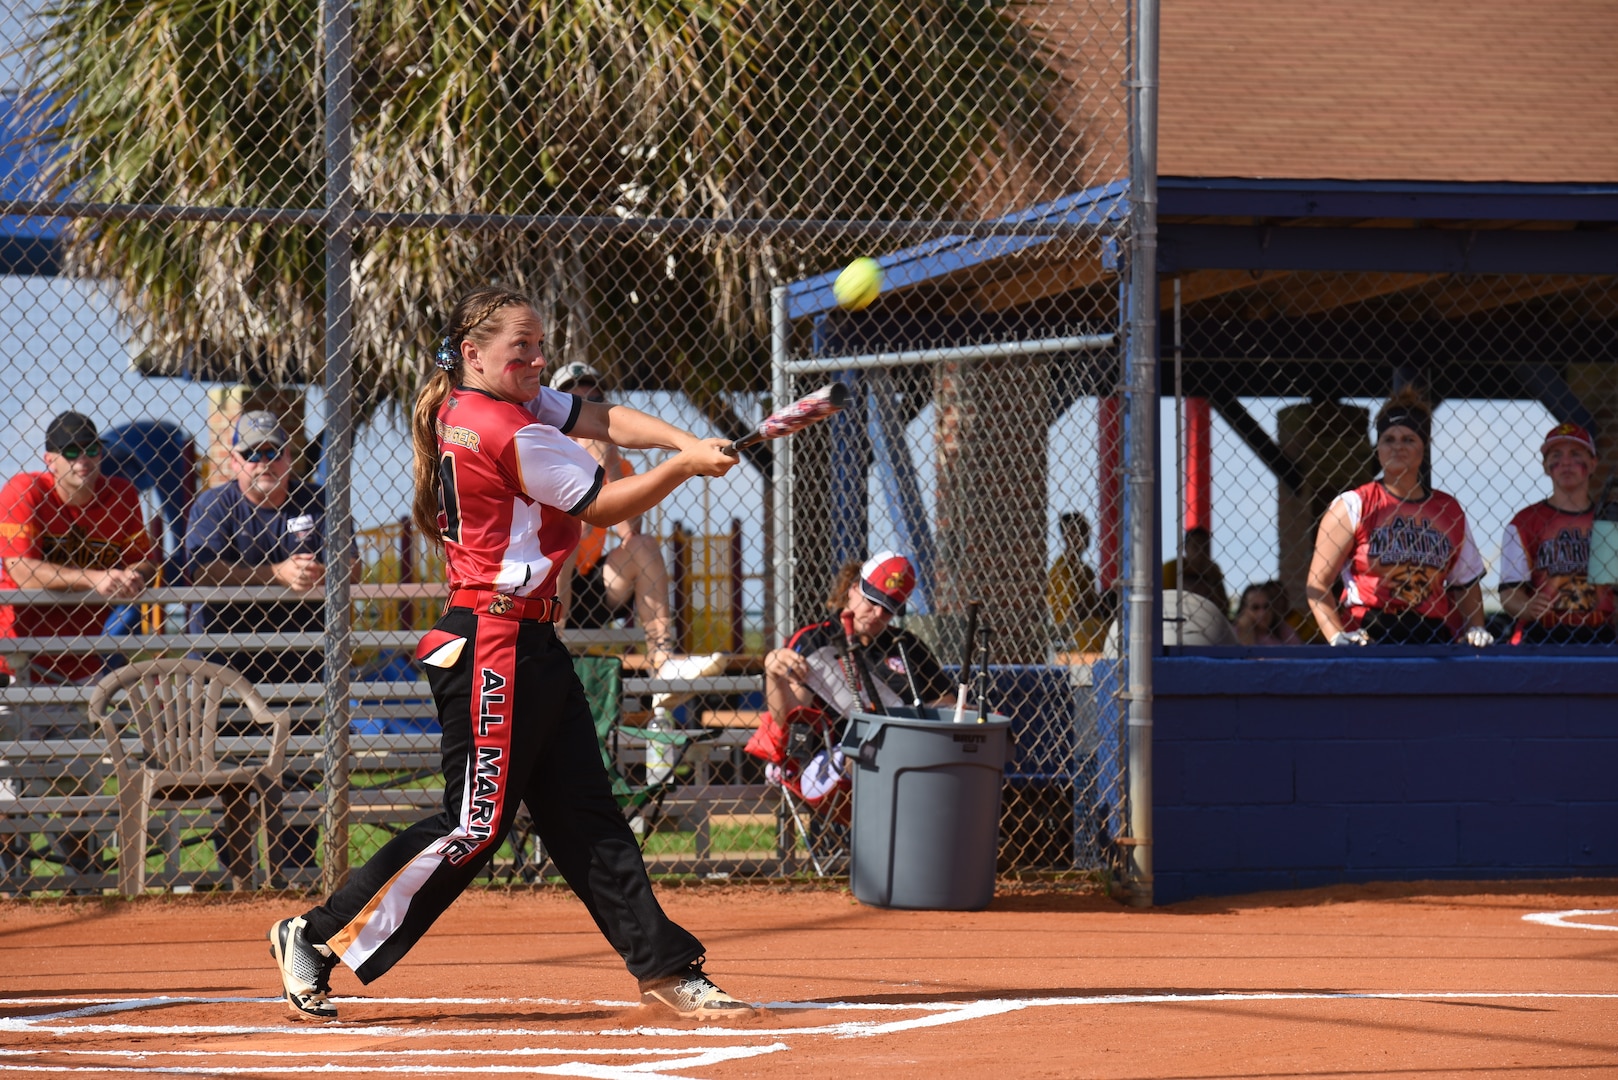 PENSACOLA, Fla. -- Marine Sgt. Katie Dunkelberger connects for a base hit during the opening game of the 2018 Armed Forces Women's Softball Championship, Aug. 15. Teams from the Navy, Army, Air Force and Marine Corps competed to determine a military women's softball champion. (U.S. Navy photo by Mass Communication Specialist 1st Class Christopher Hurd/Released)